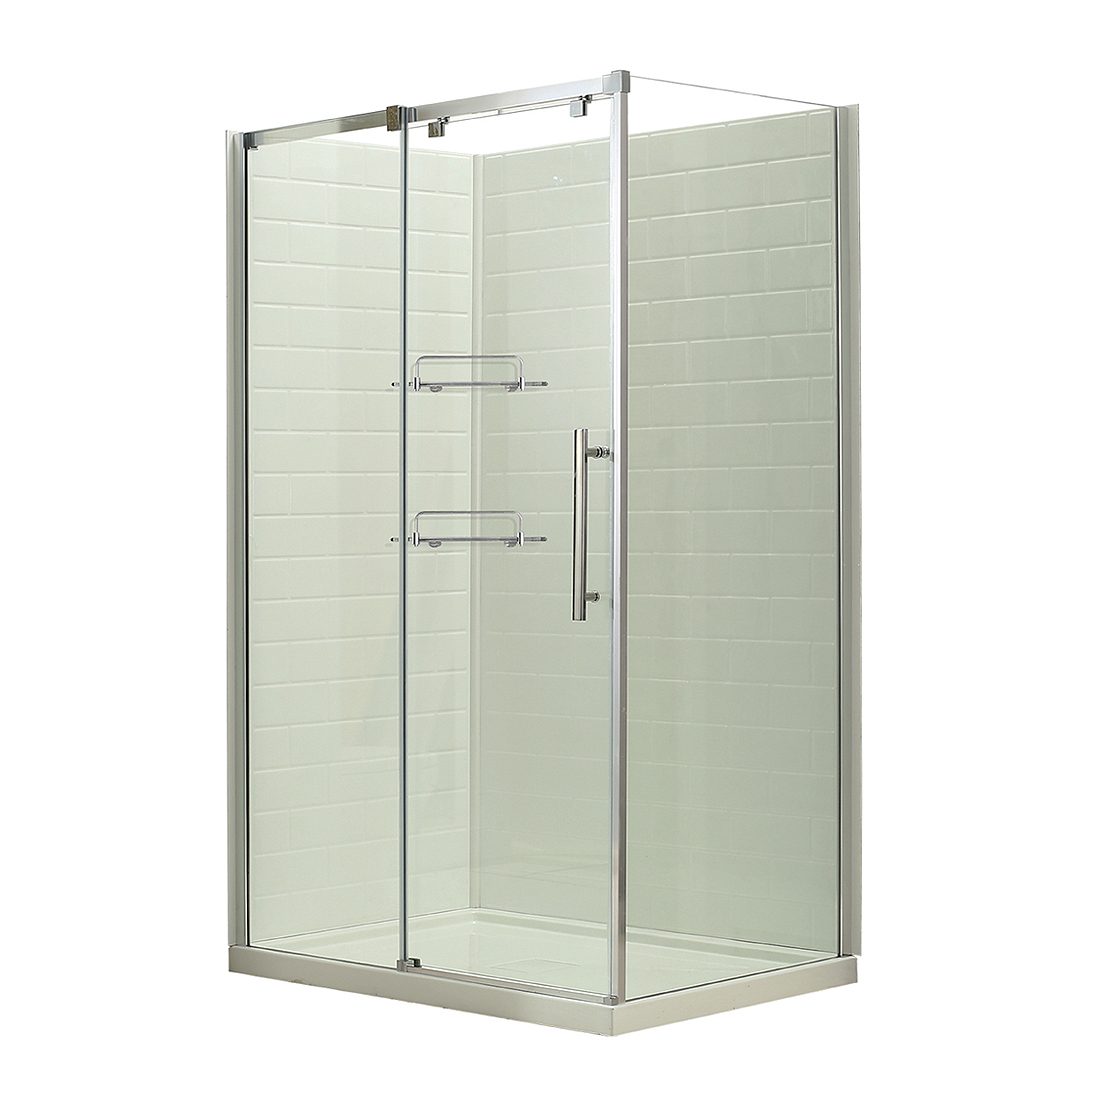 London Shower Center 38inch Front View